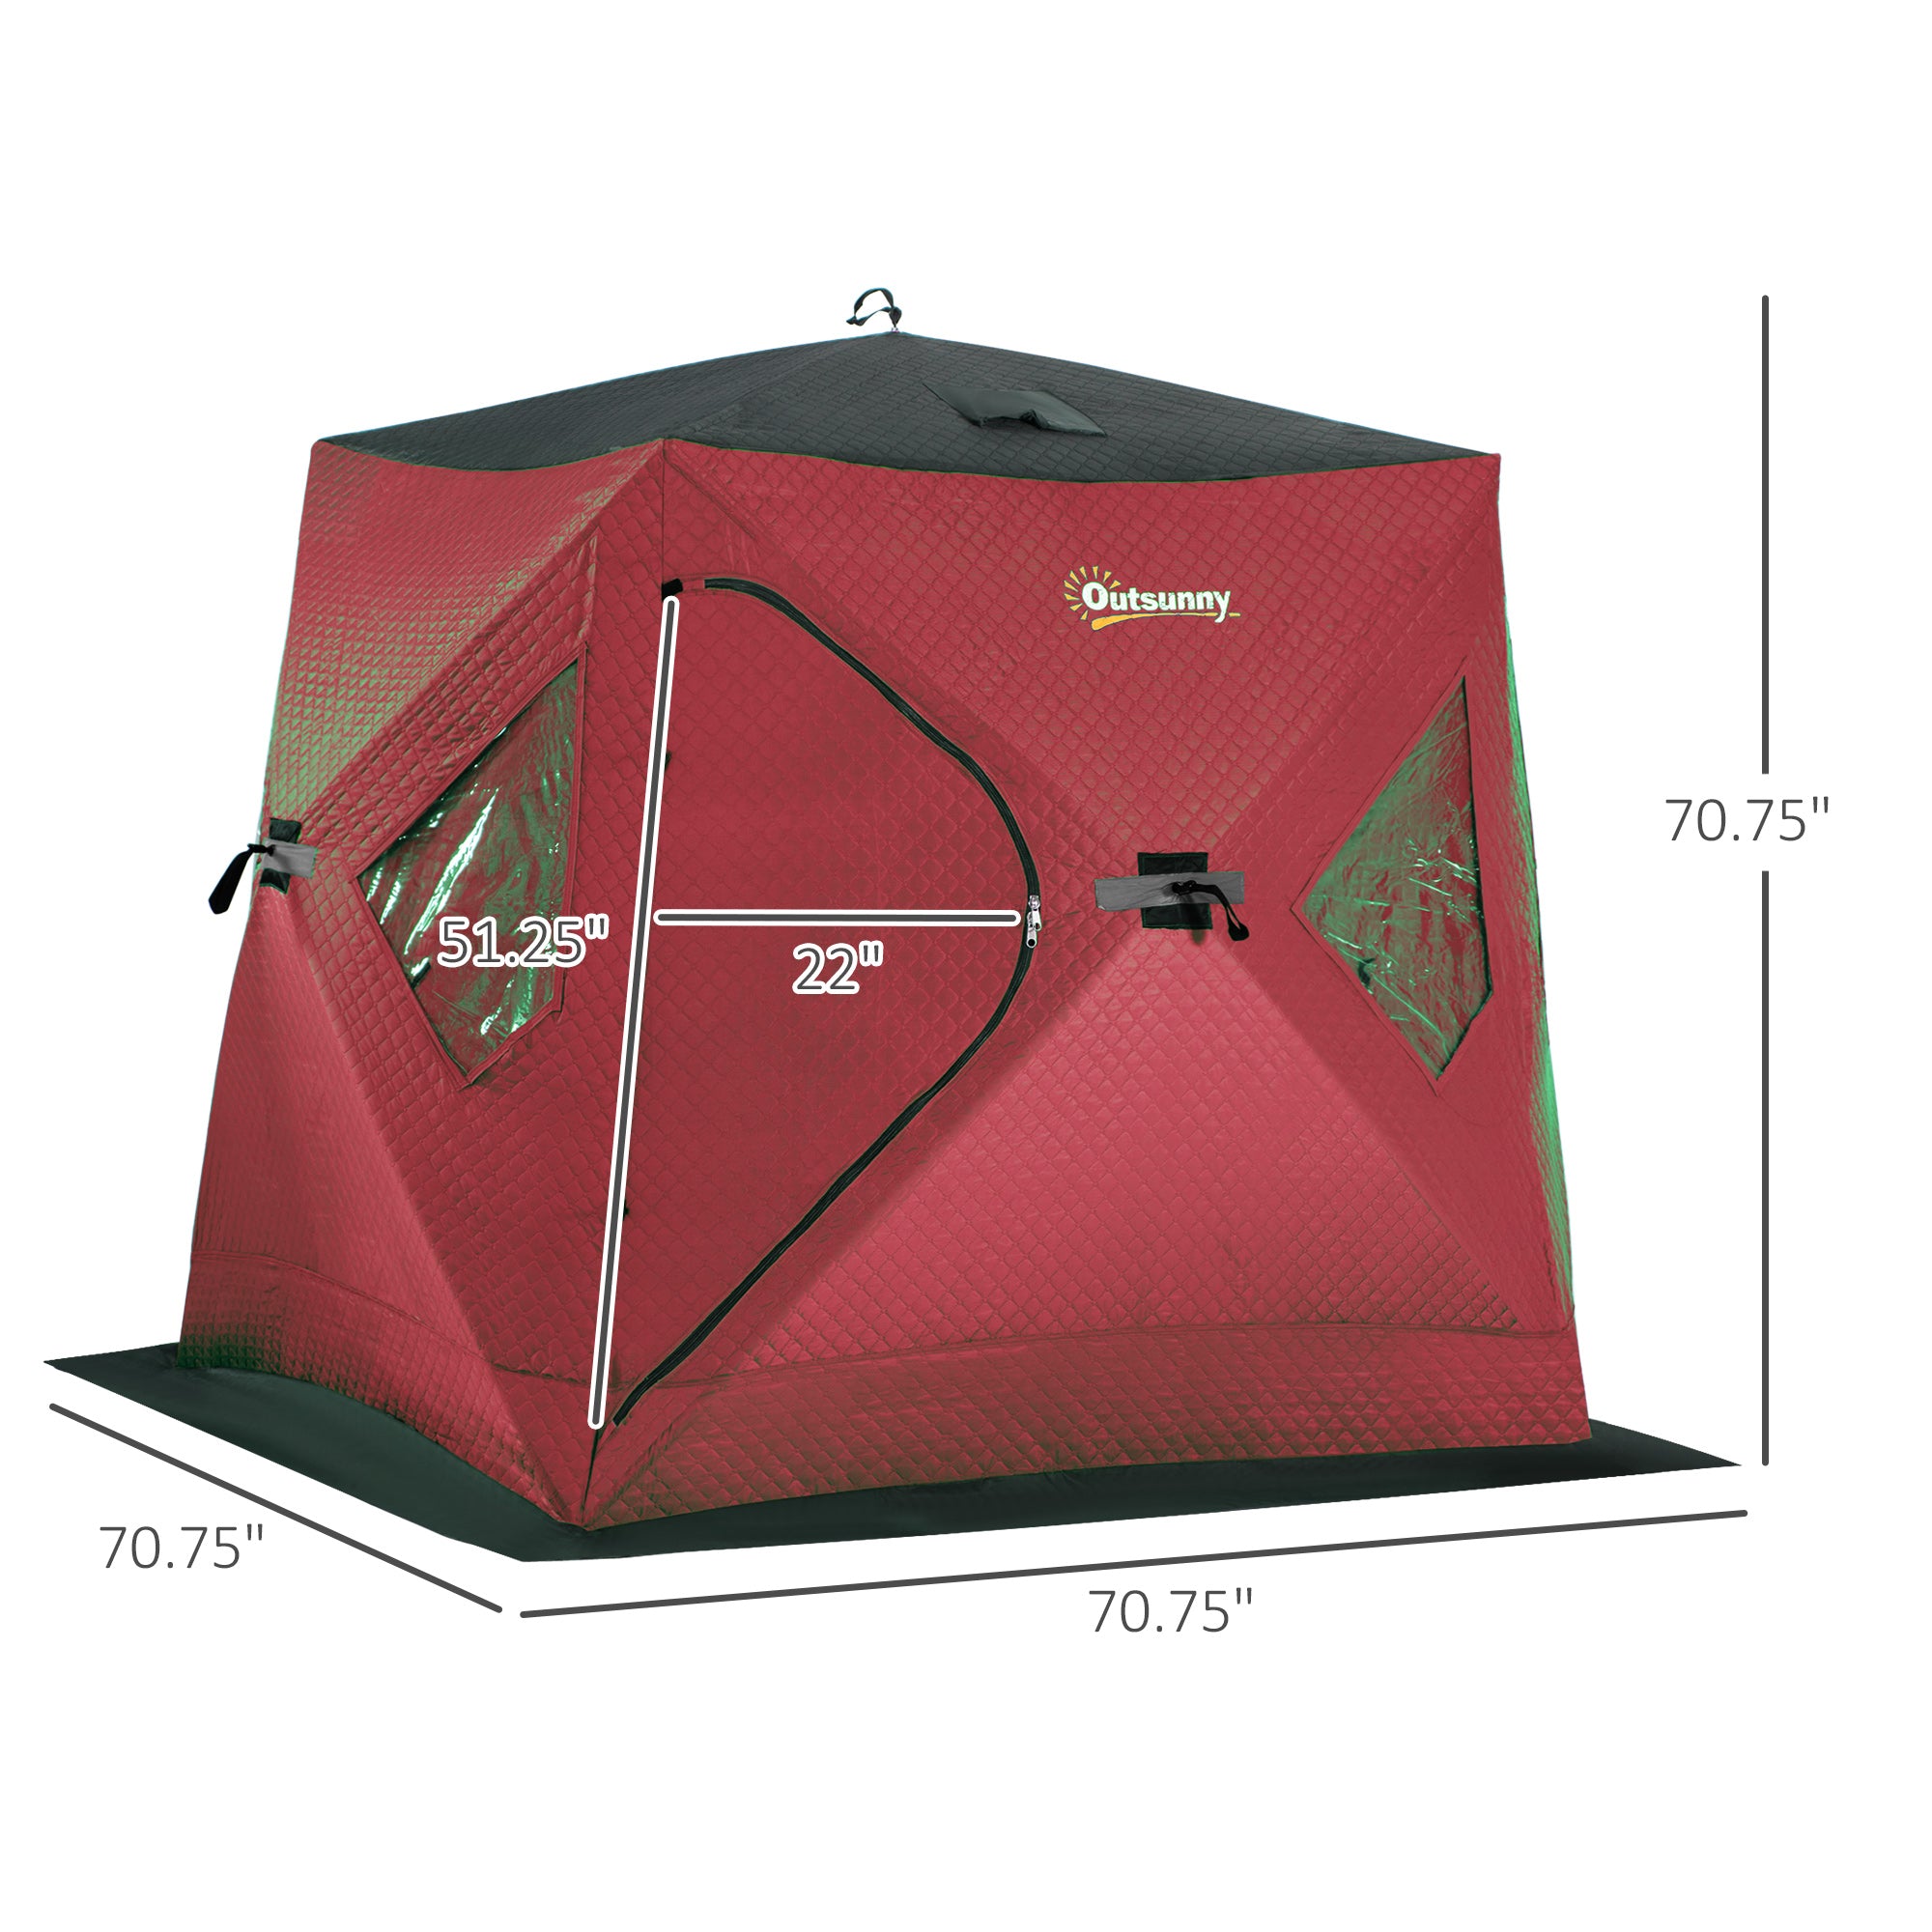 Outsunny 2 Person Ice Fishing Shelter Pop-p Portable Ice Fishing Tent， Red